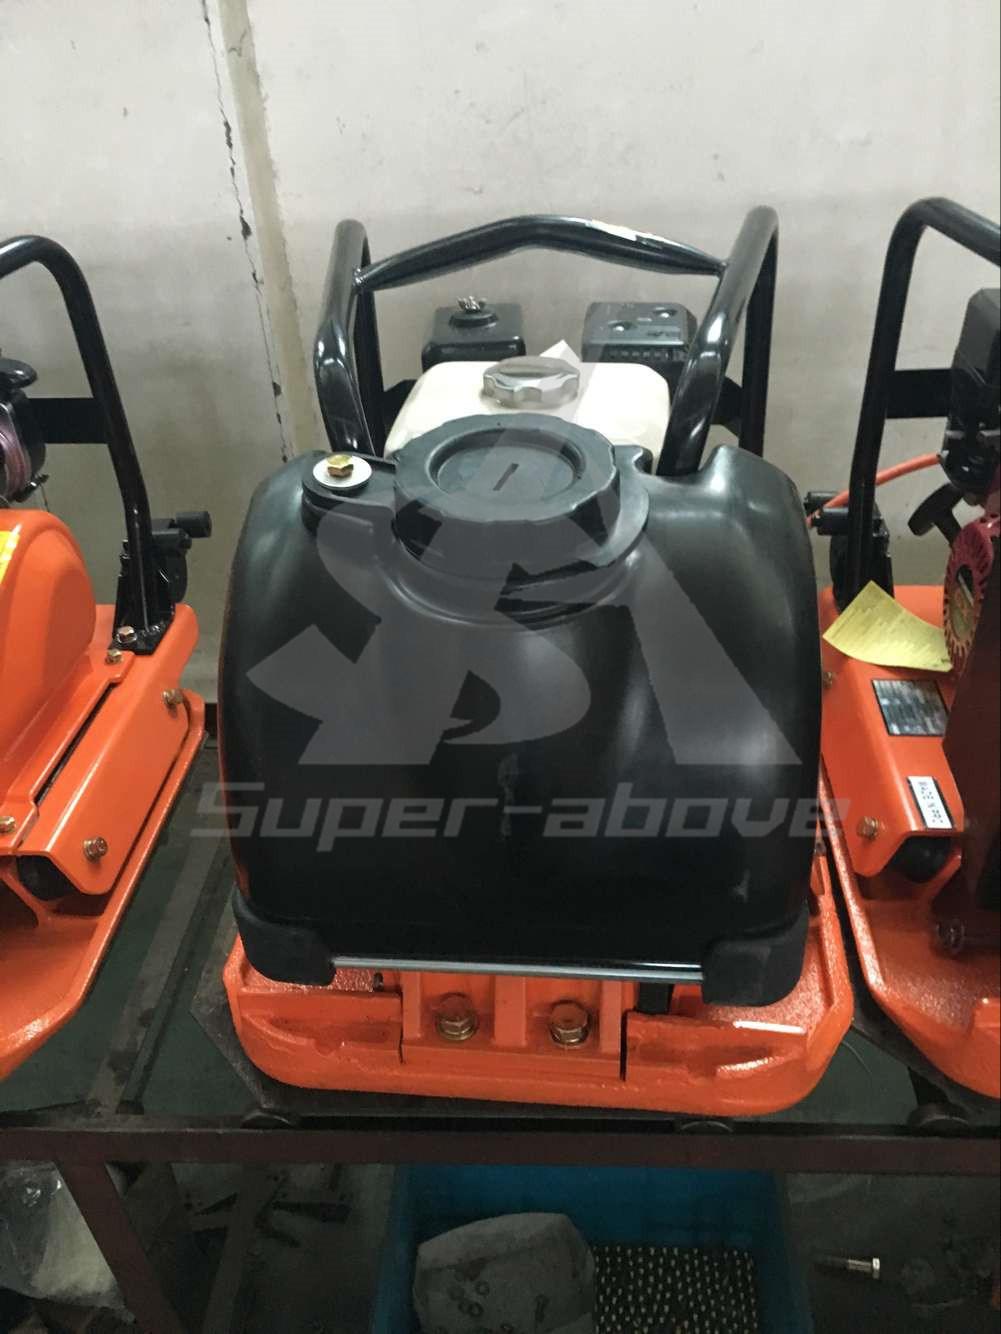 Ce Approved Vibrating Flat Concrete Plate Compactor Tamper Price